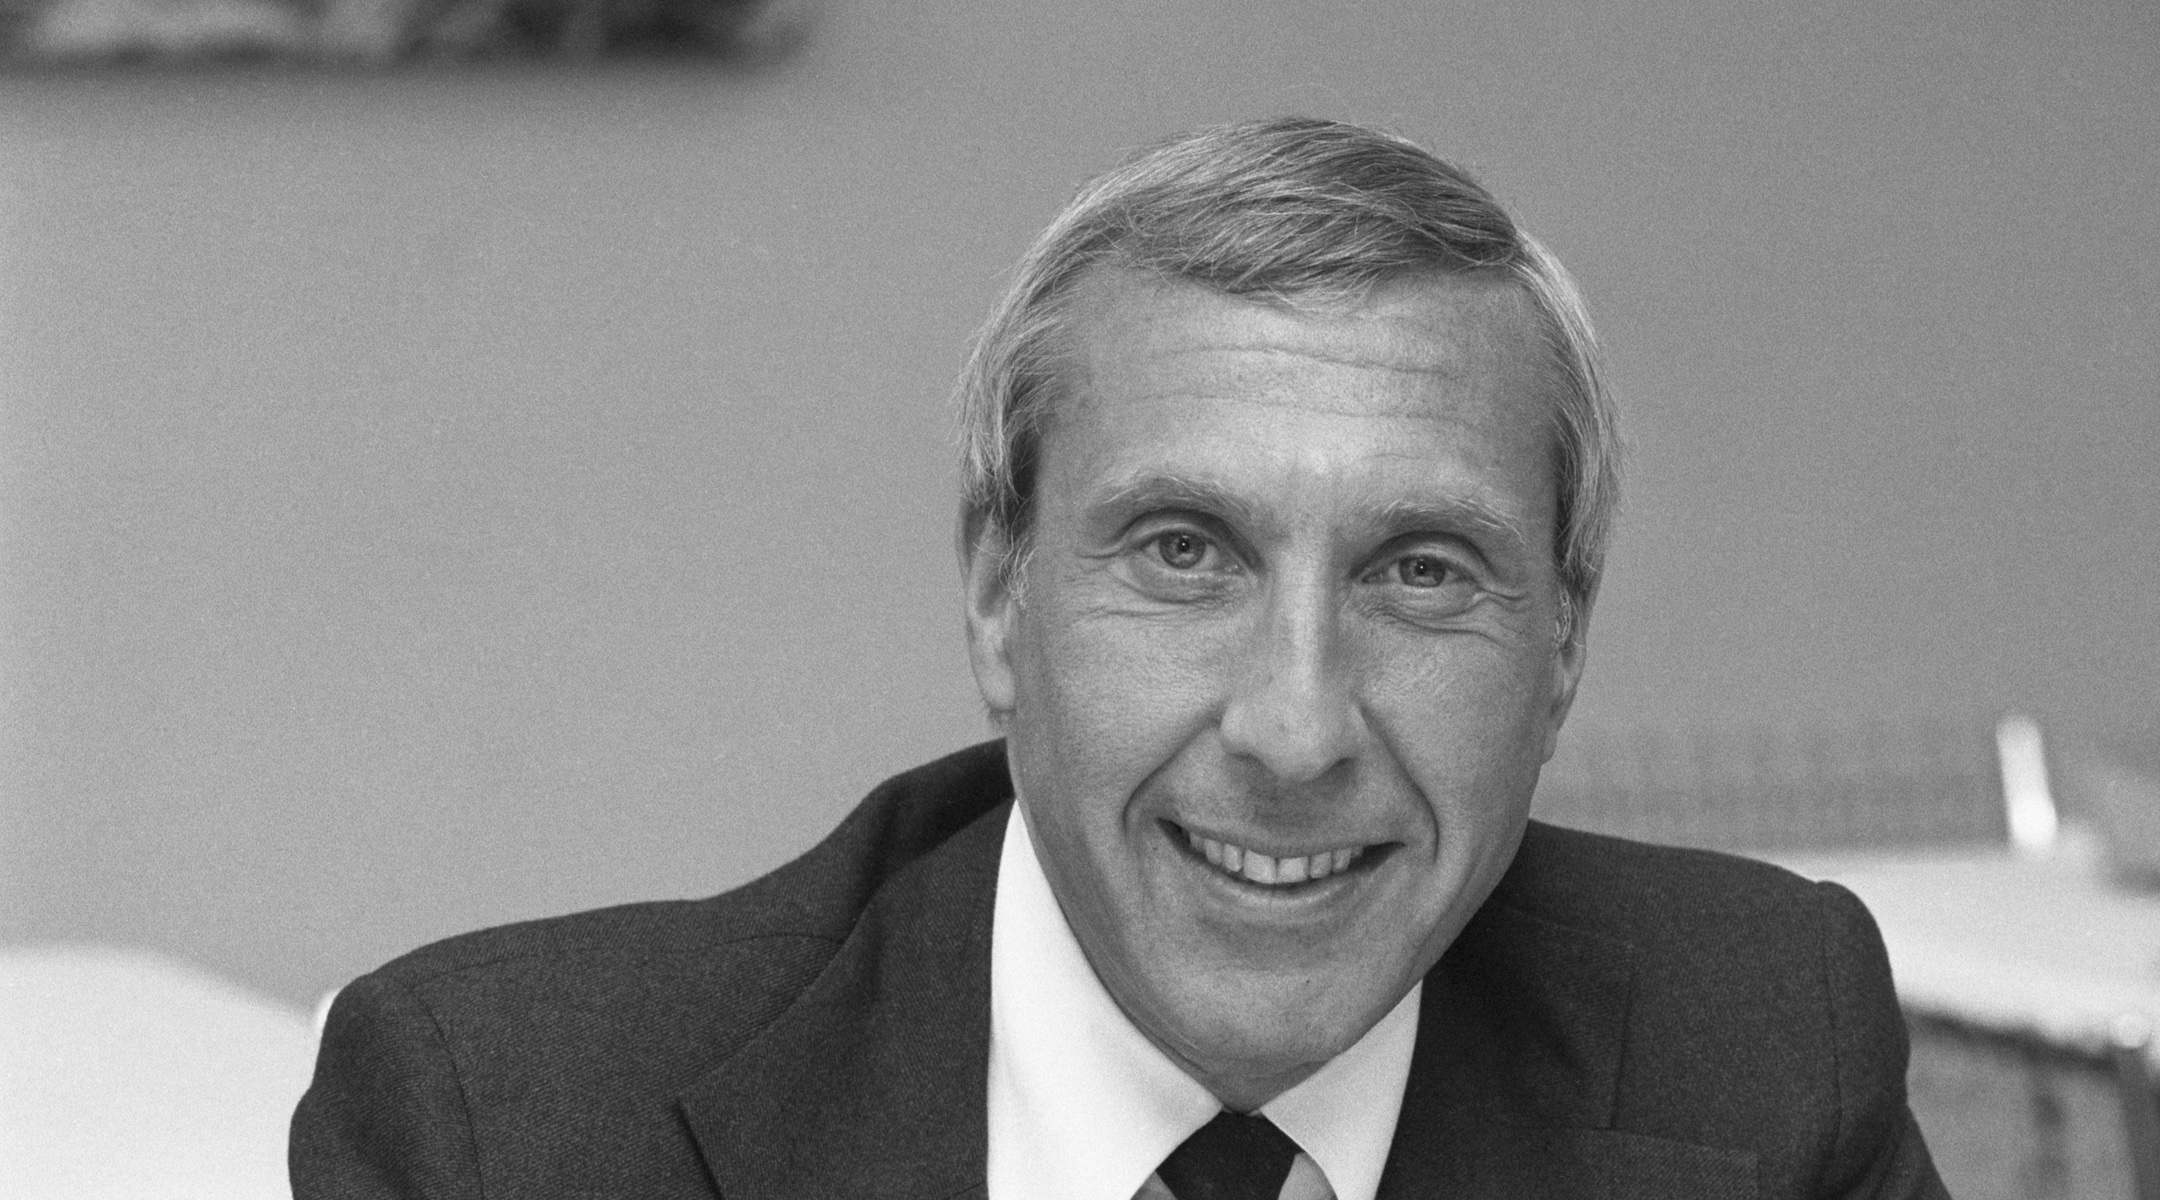 Ivan Boesky, an American financier and expert in risk arbitrage who would later be convicted of illegal insider trading, seen in New York on July 29, 1983. (Bettmann/Getty Images)